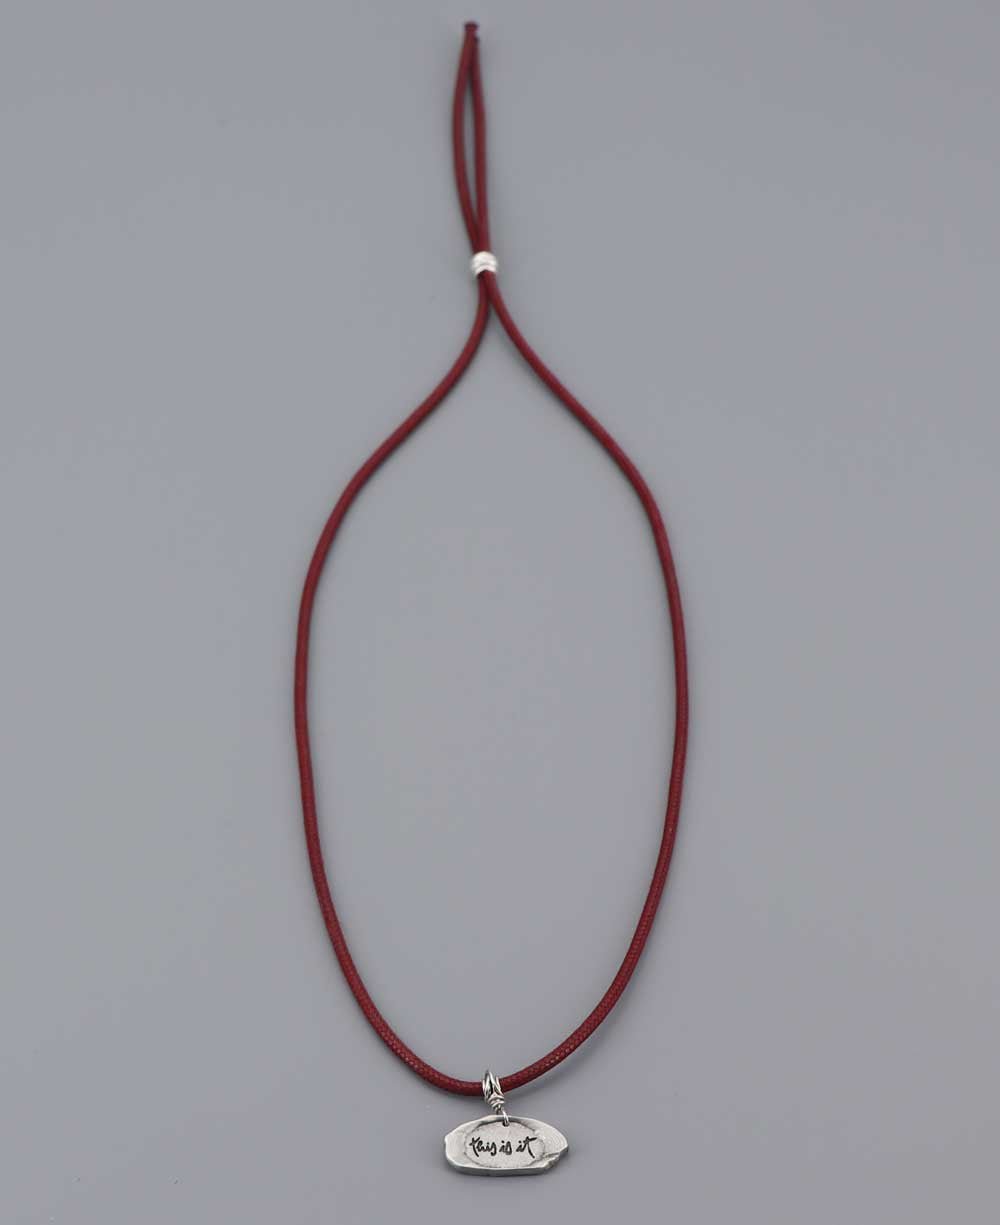 Thich Nhat Hanh This Is It Pendant Necklace - Necklaces